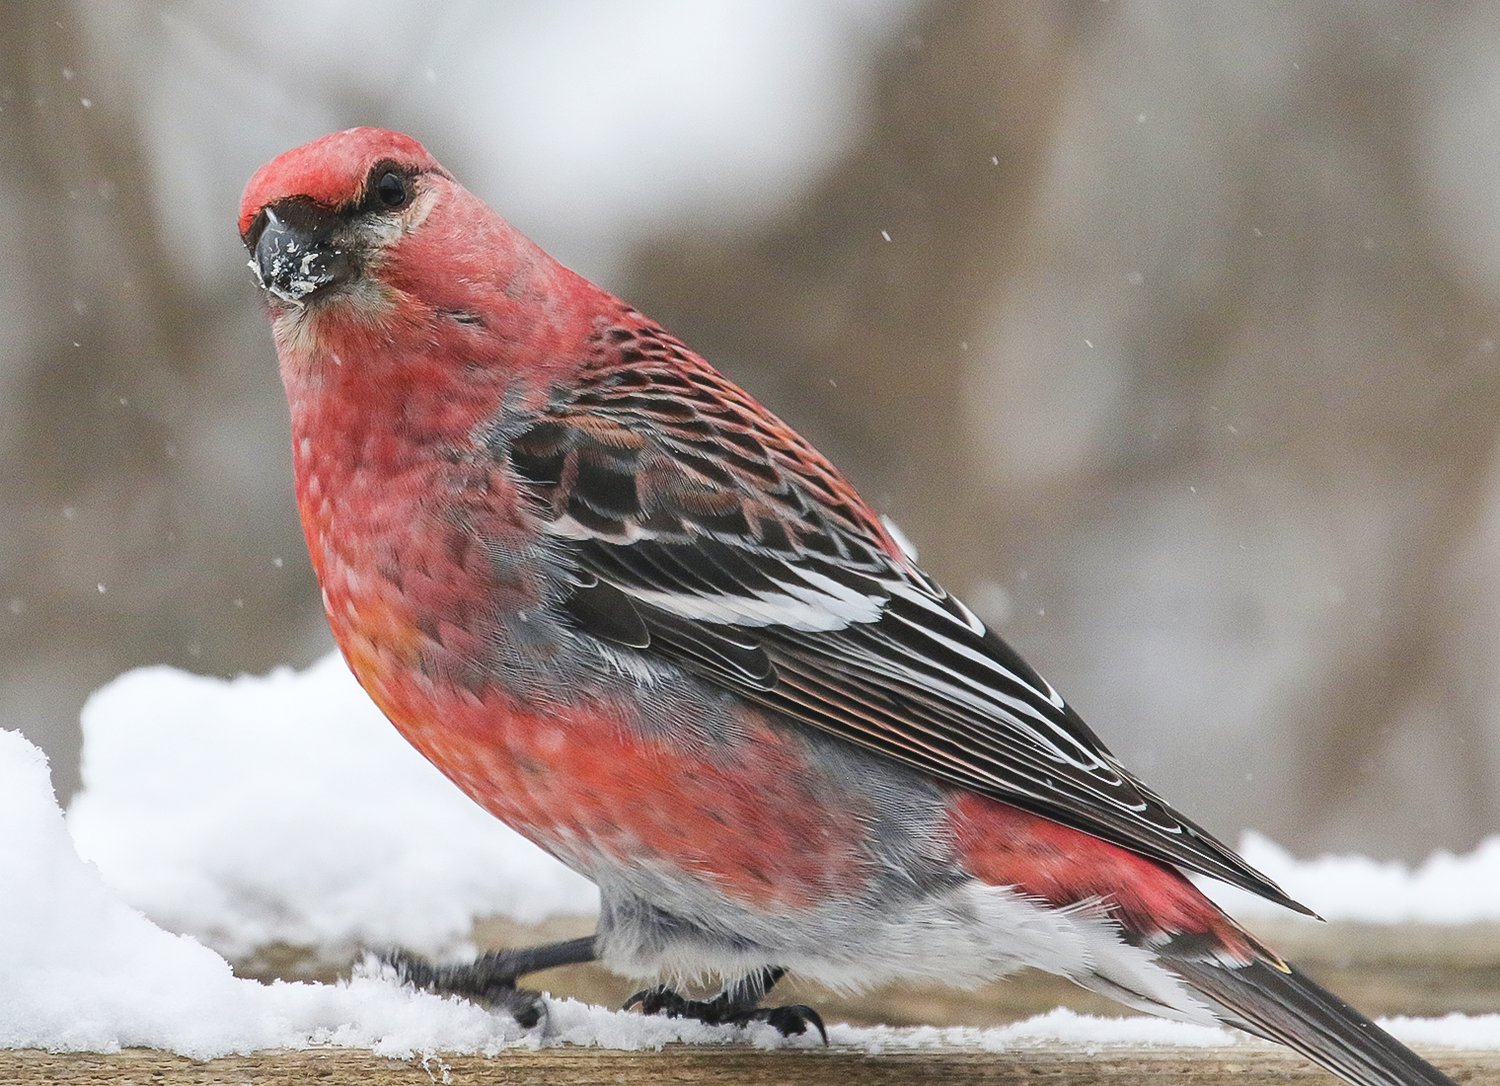 A lone male pine grosbeak was still in the feeder early this week but had moved on as of Wednesday.